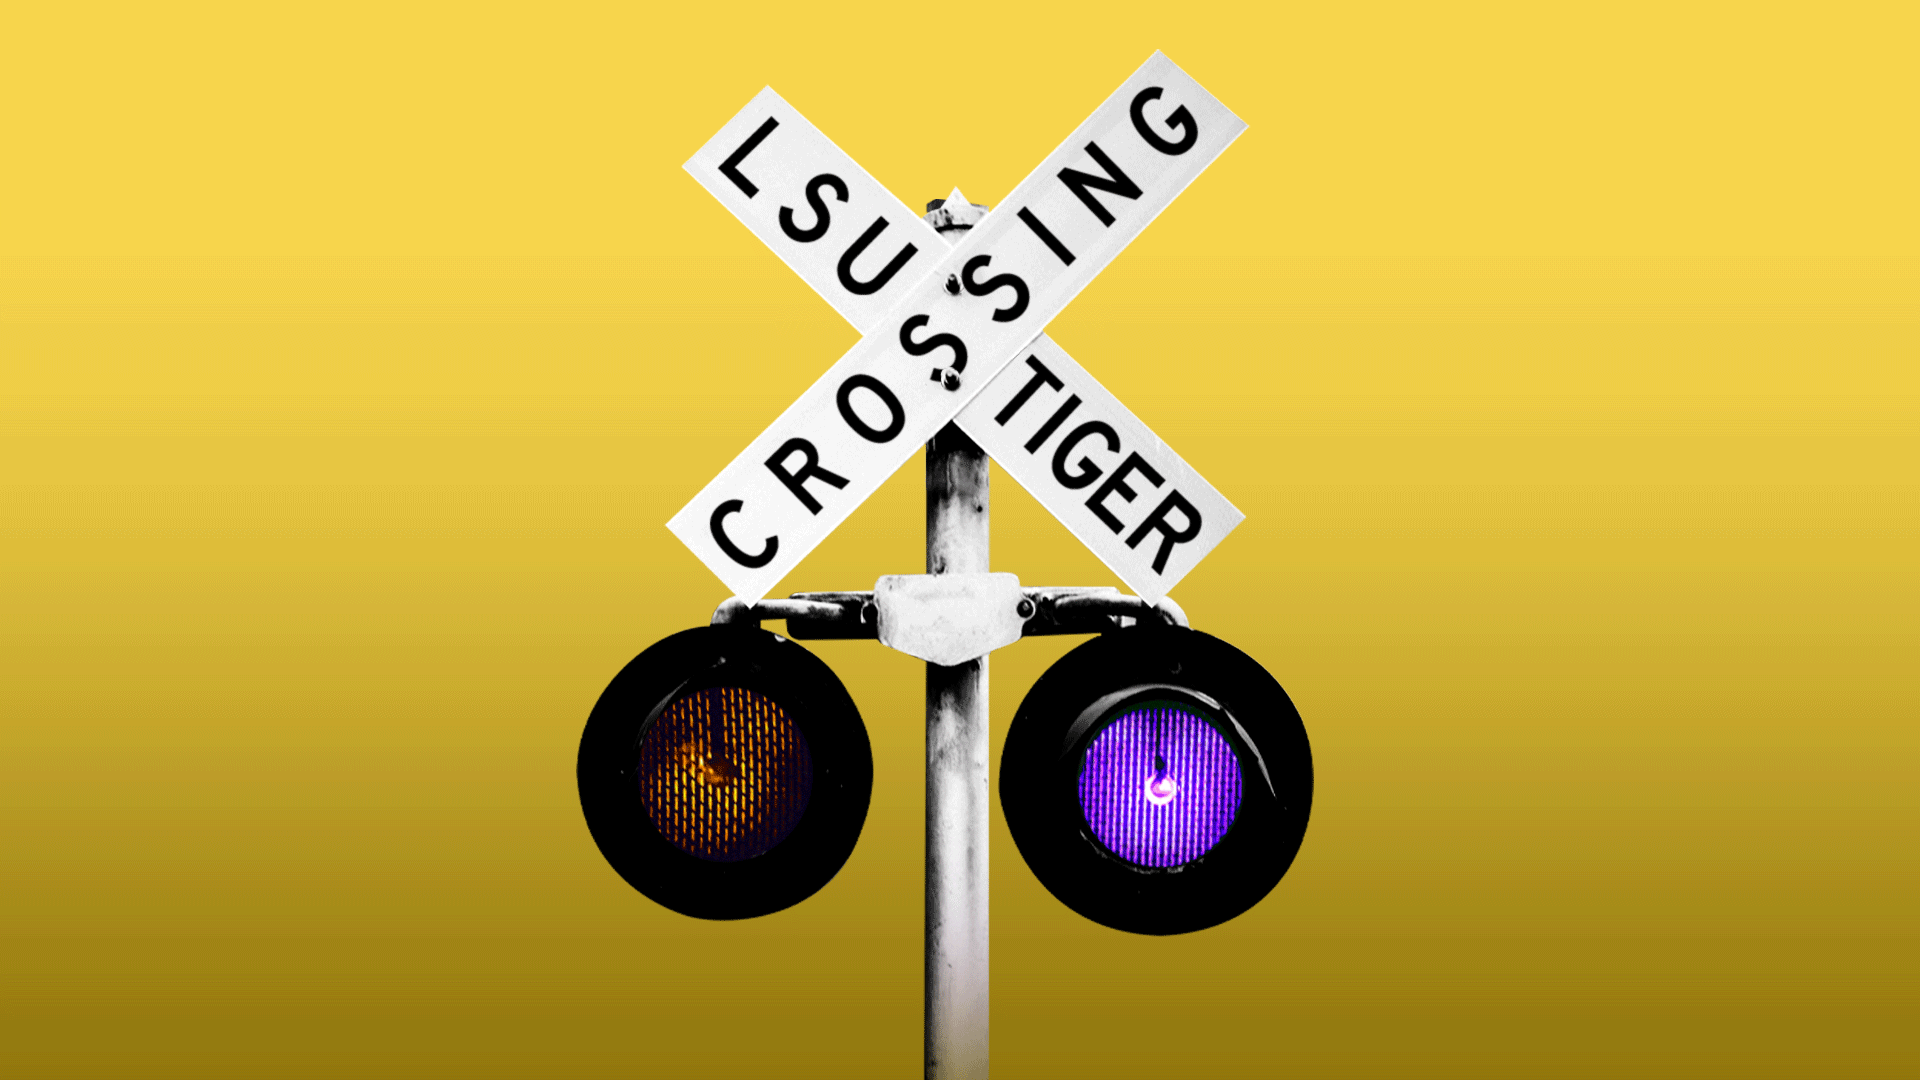 Illustration of a blinking light railroad sign that says LSU TIGER CROSSING with purple and gold lights